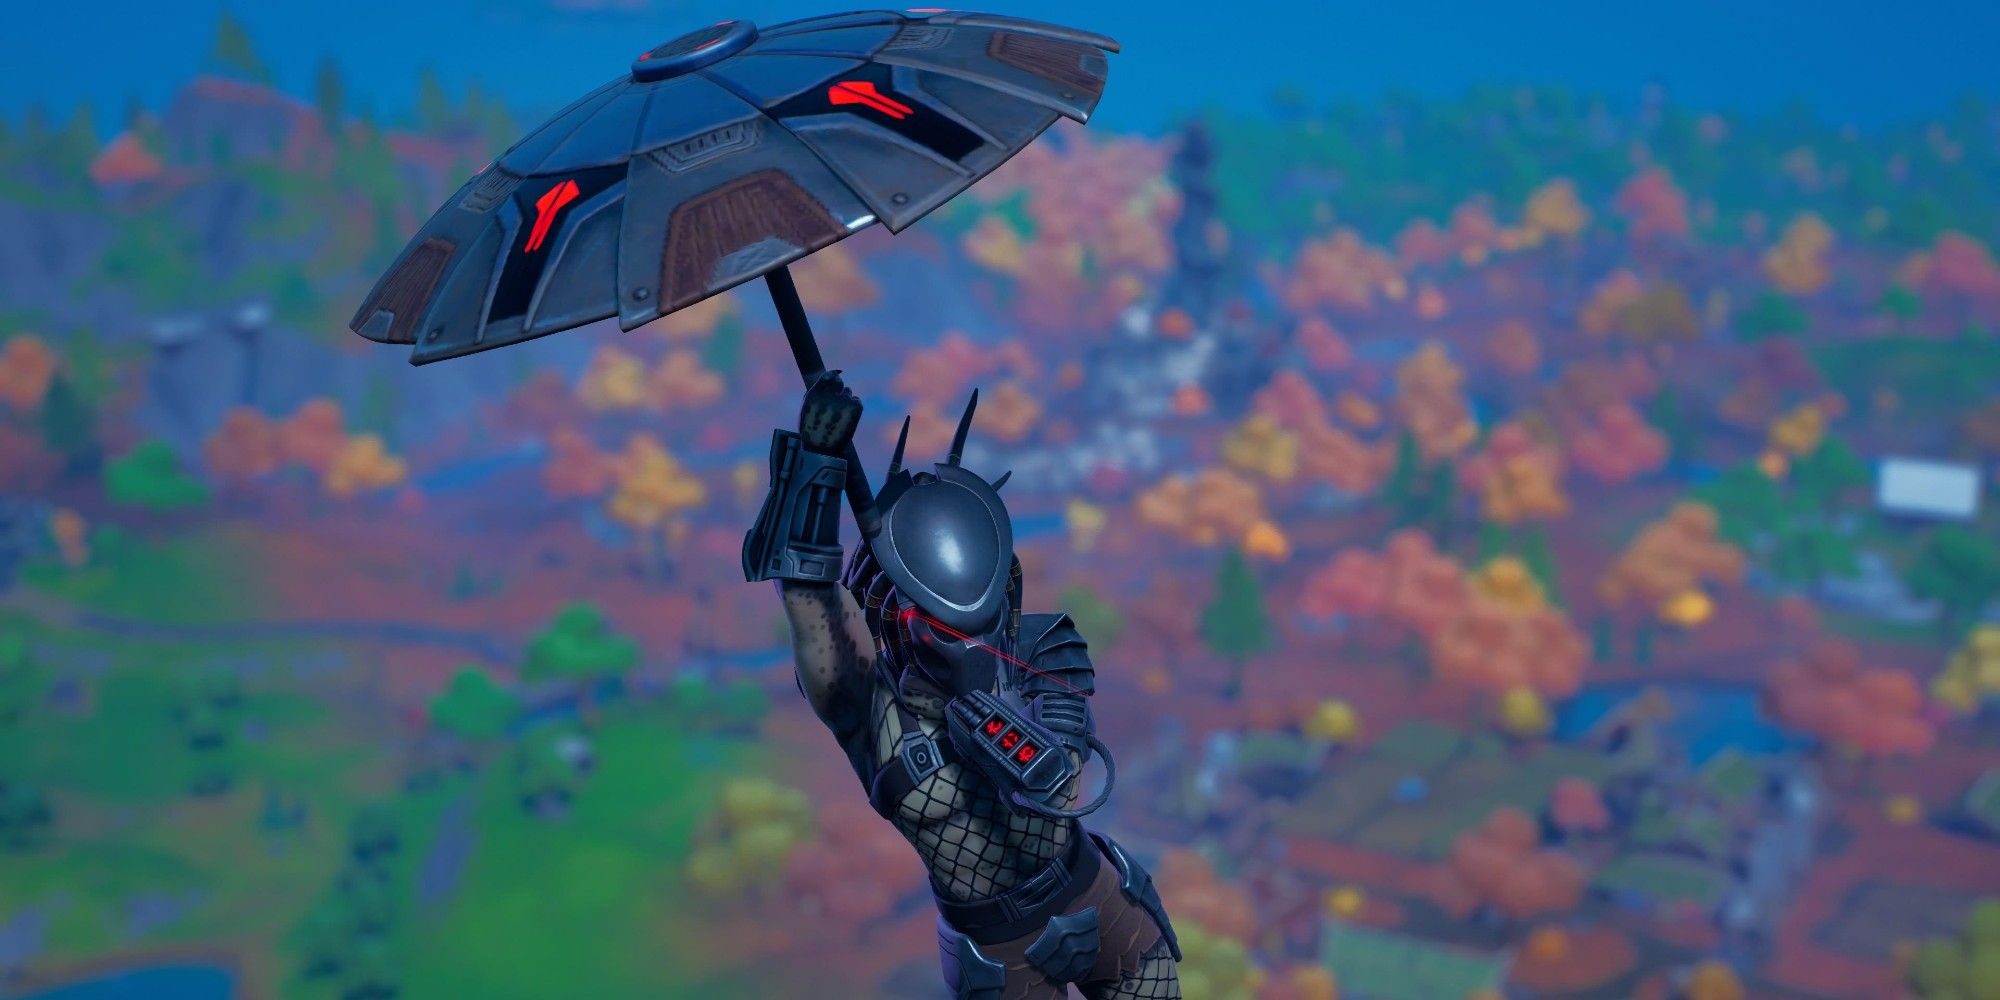 A player dressed as the Predator uses the Foundational 'Brella from the Seven Set in Fortnite Season 6